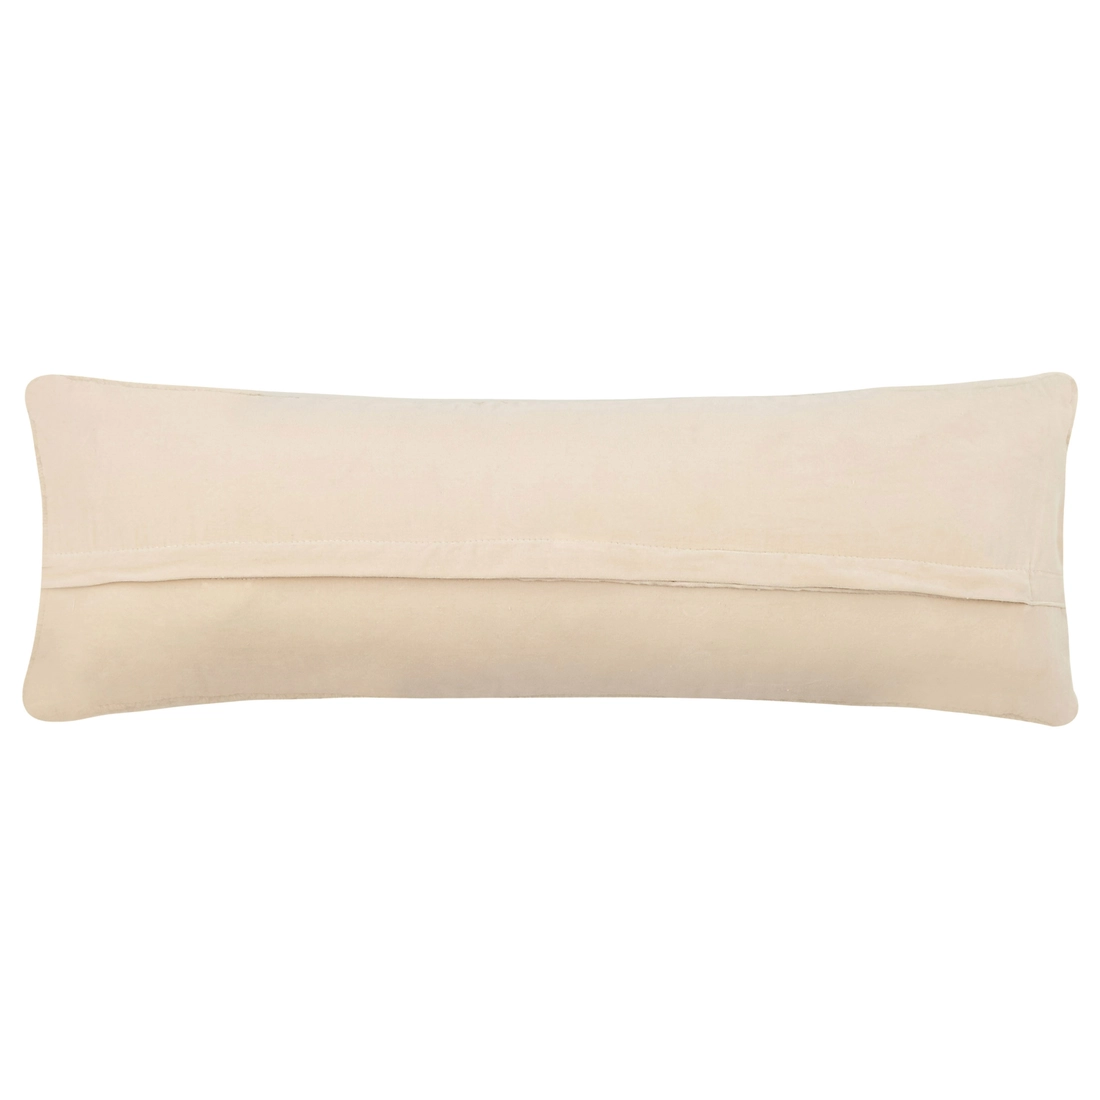 Welcome' Whale Hook Pillow 8x24 – Fenwick Float-ors